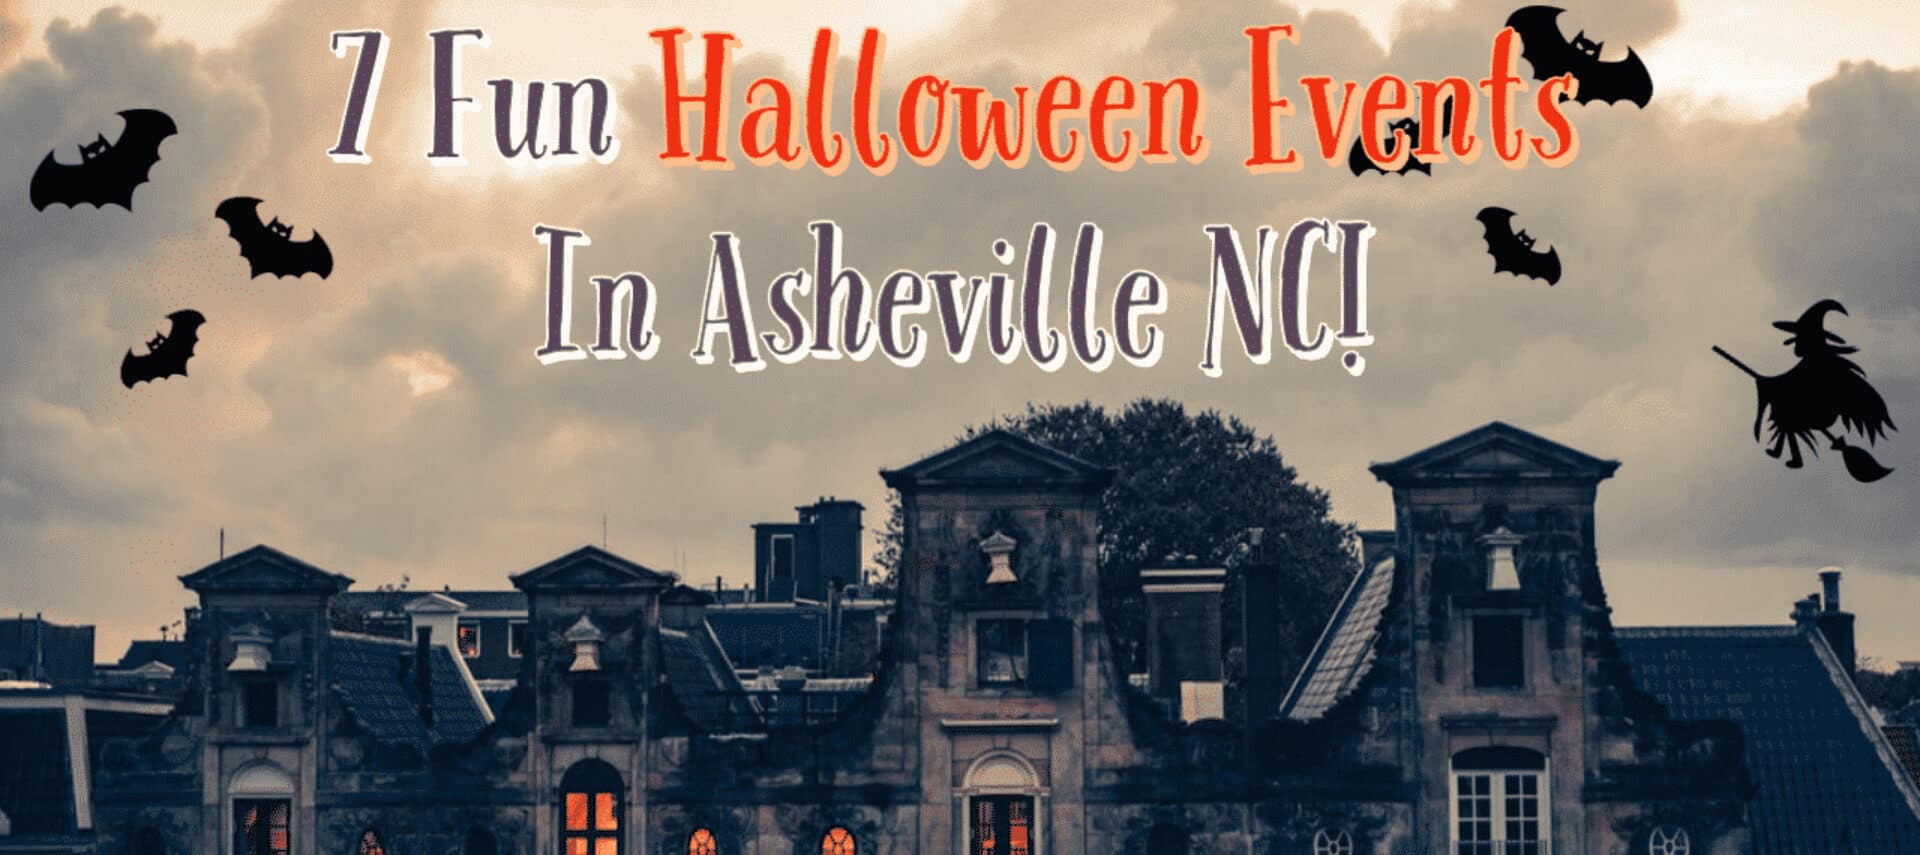 Scary haunted house with text : "7 Fun Halloween Events in Asheville, NC!"